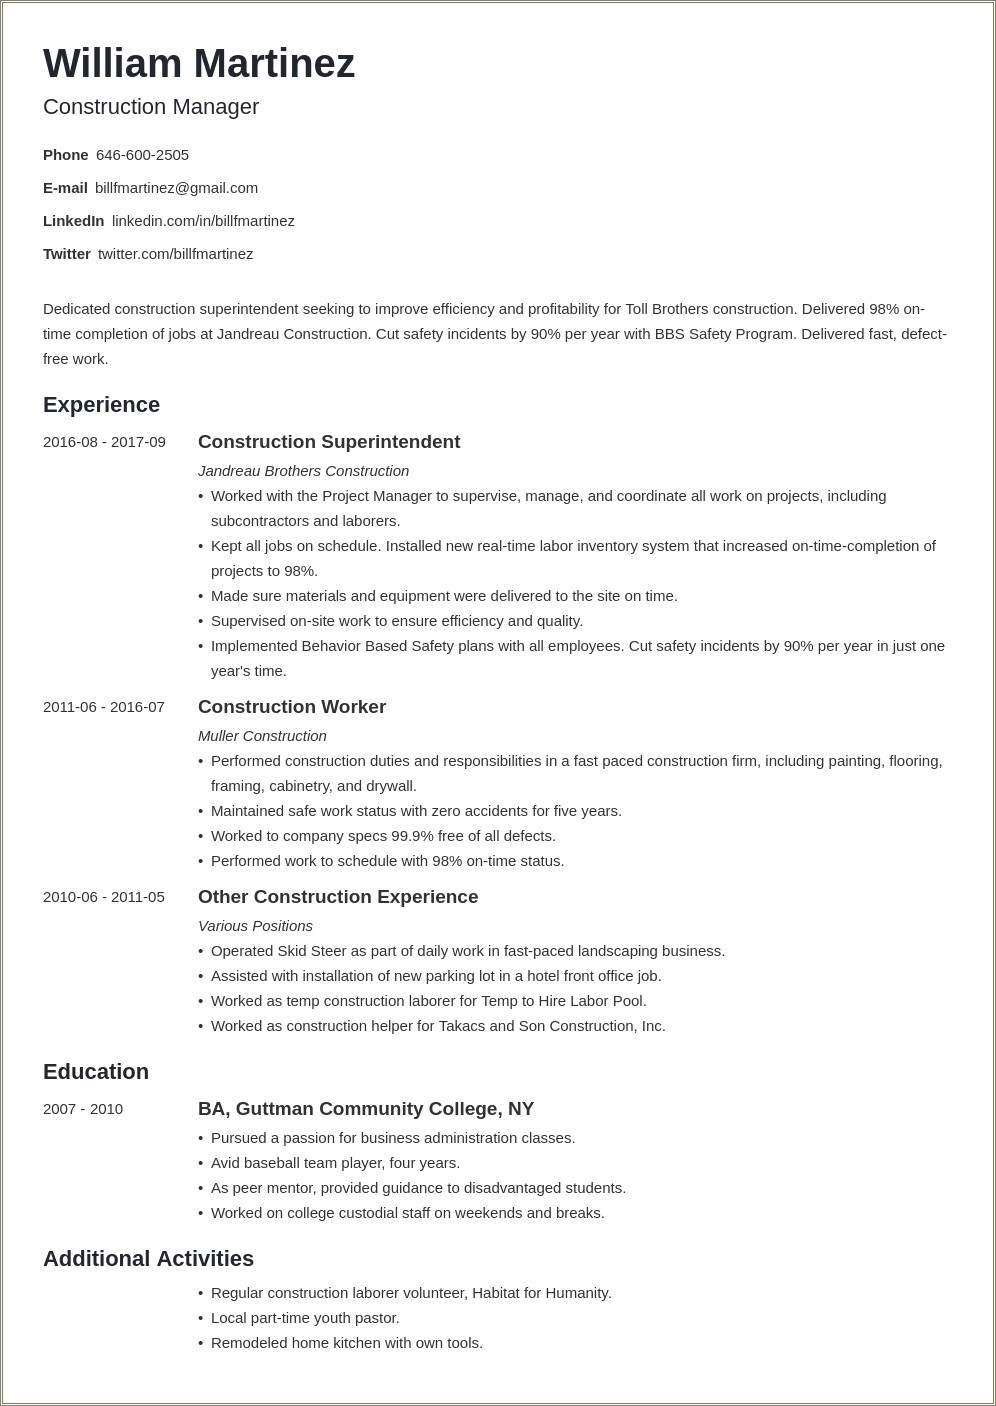 Resume Examples For Construction In Jails